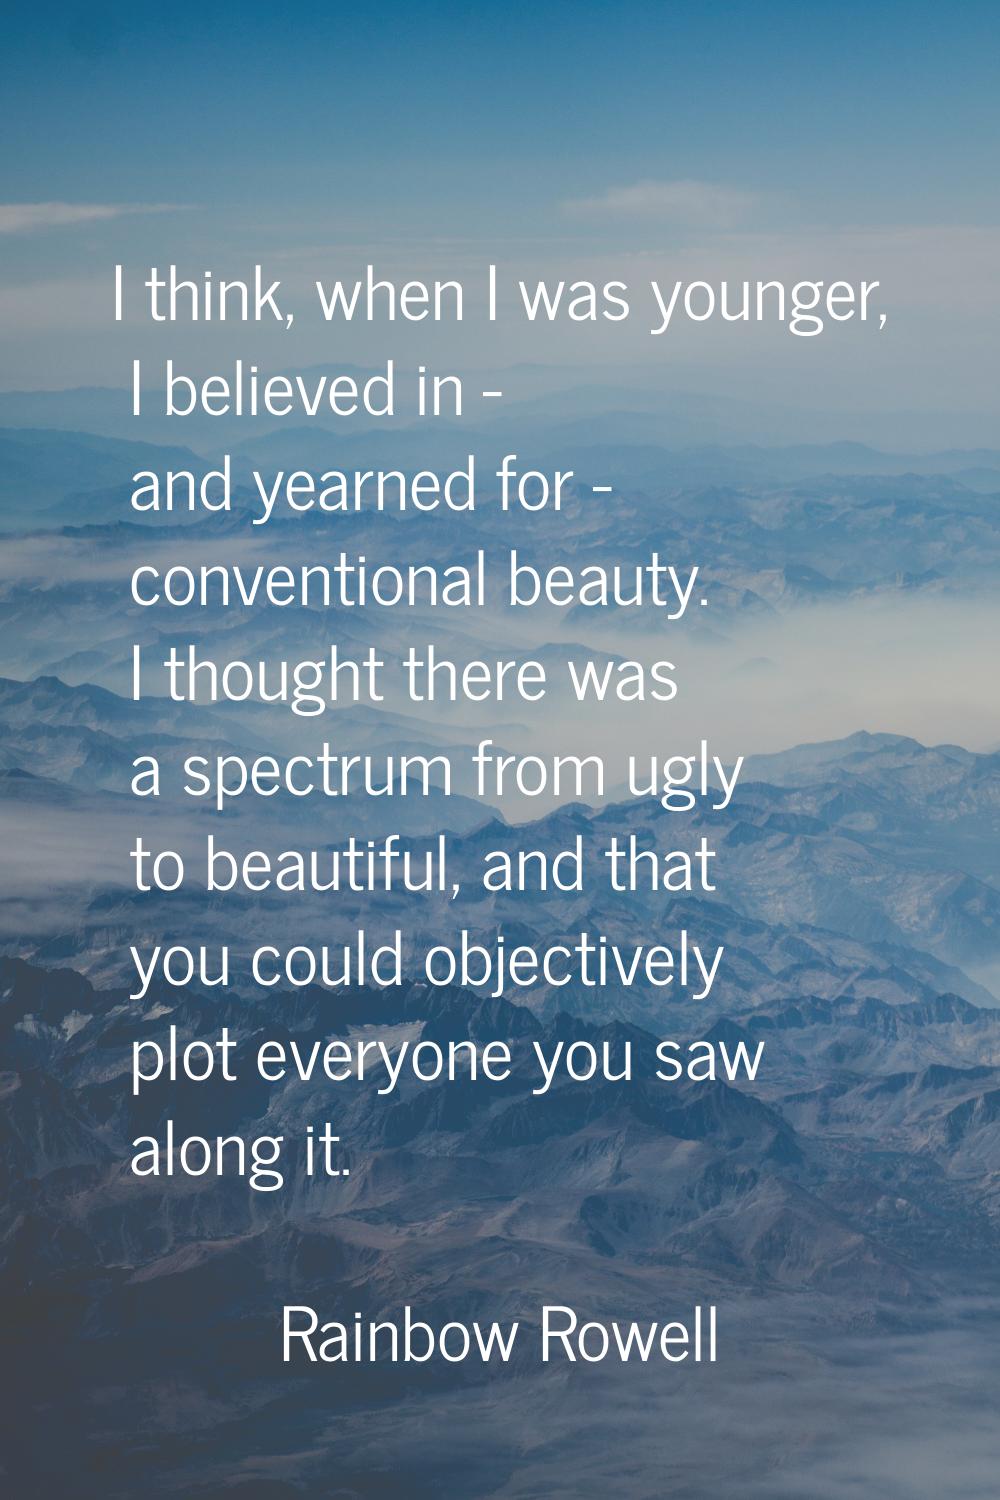 I think, when I was younger, I believed in - and yearned for - conventional beauty. I thought there